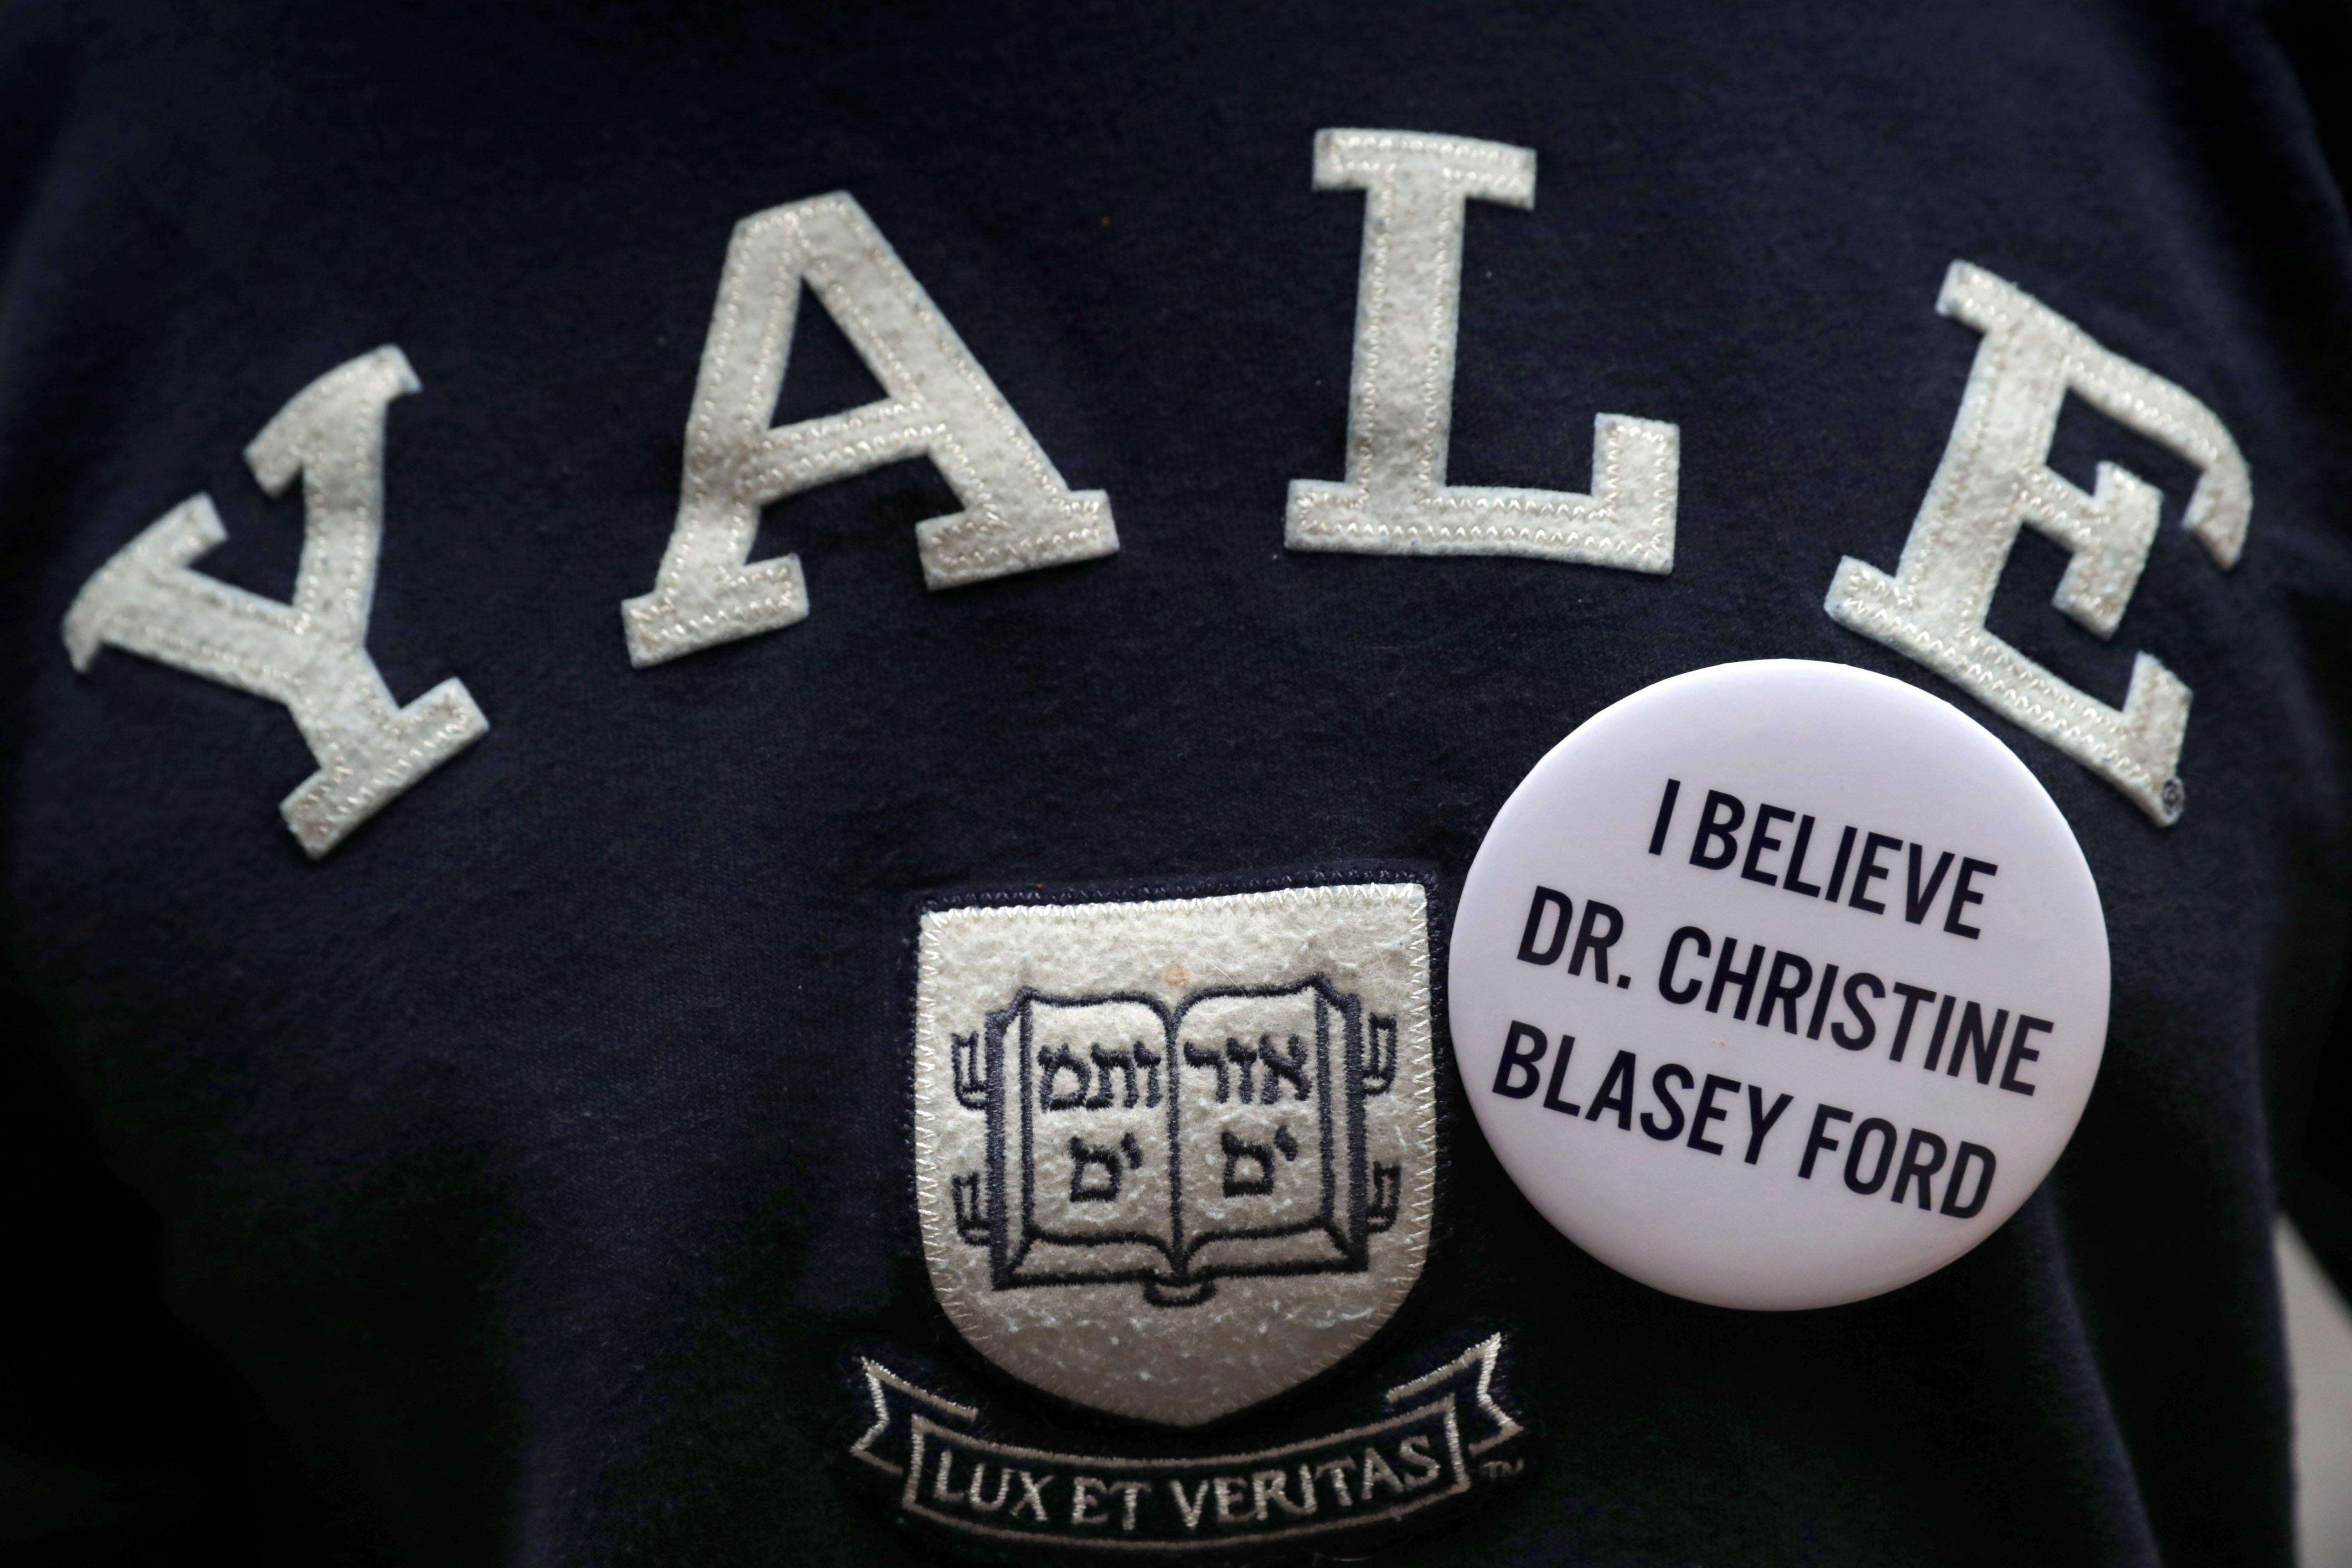 A Yale sweatshirt with a pin in support of Christine Blasey Ford